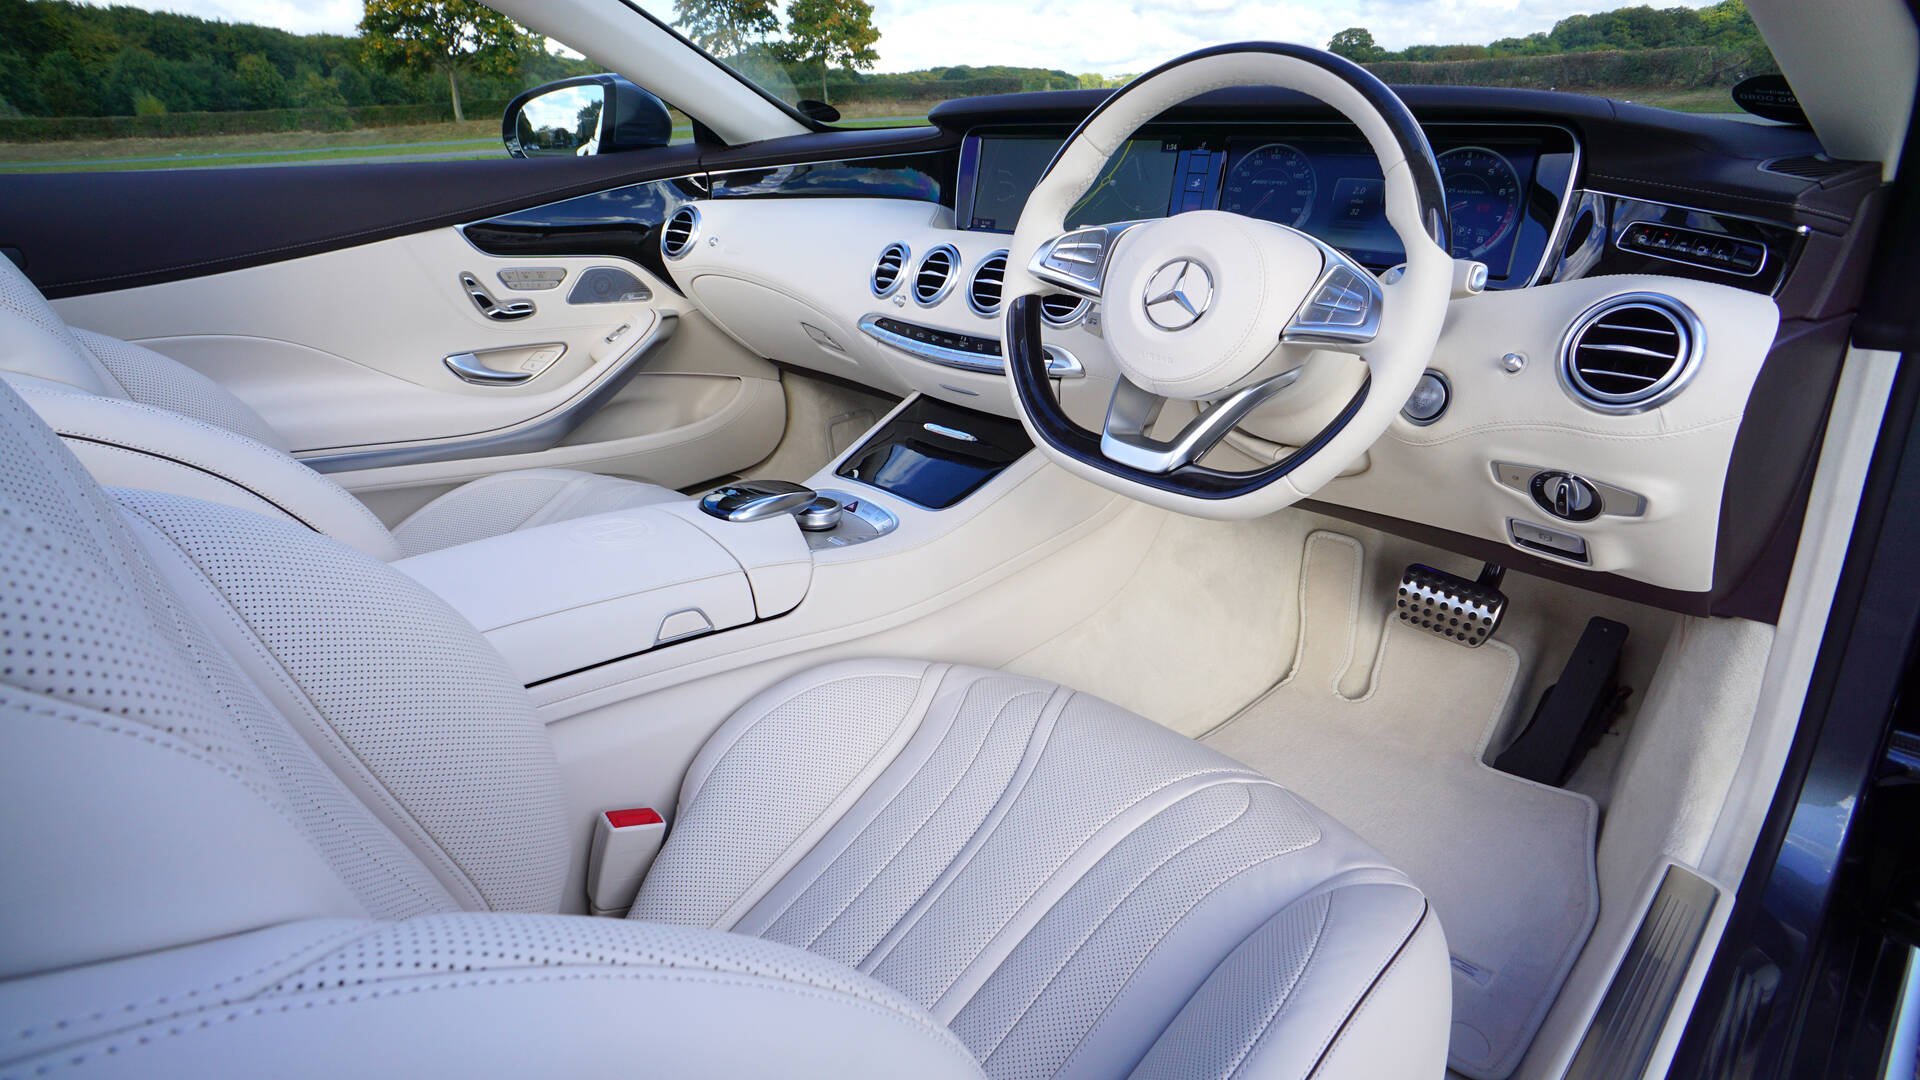 Beige leather interior of a luxury car